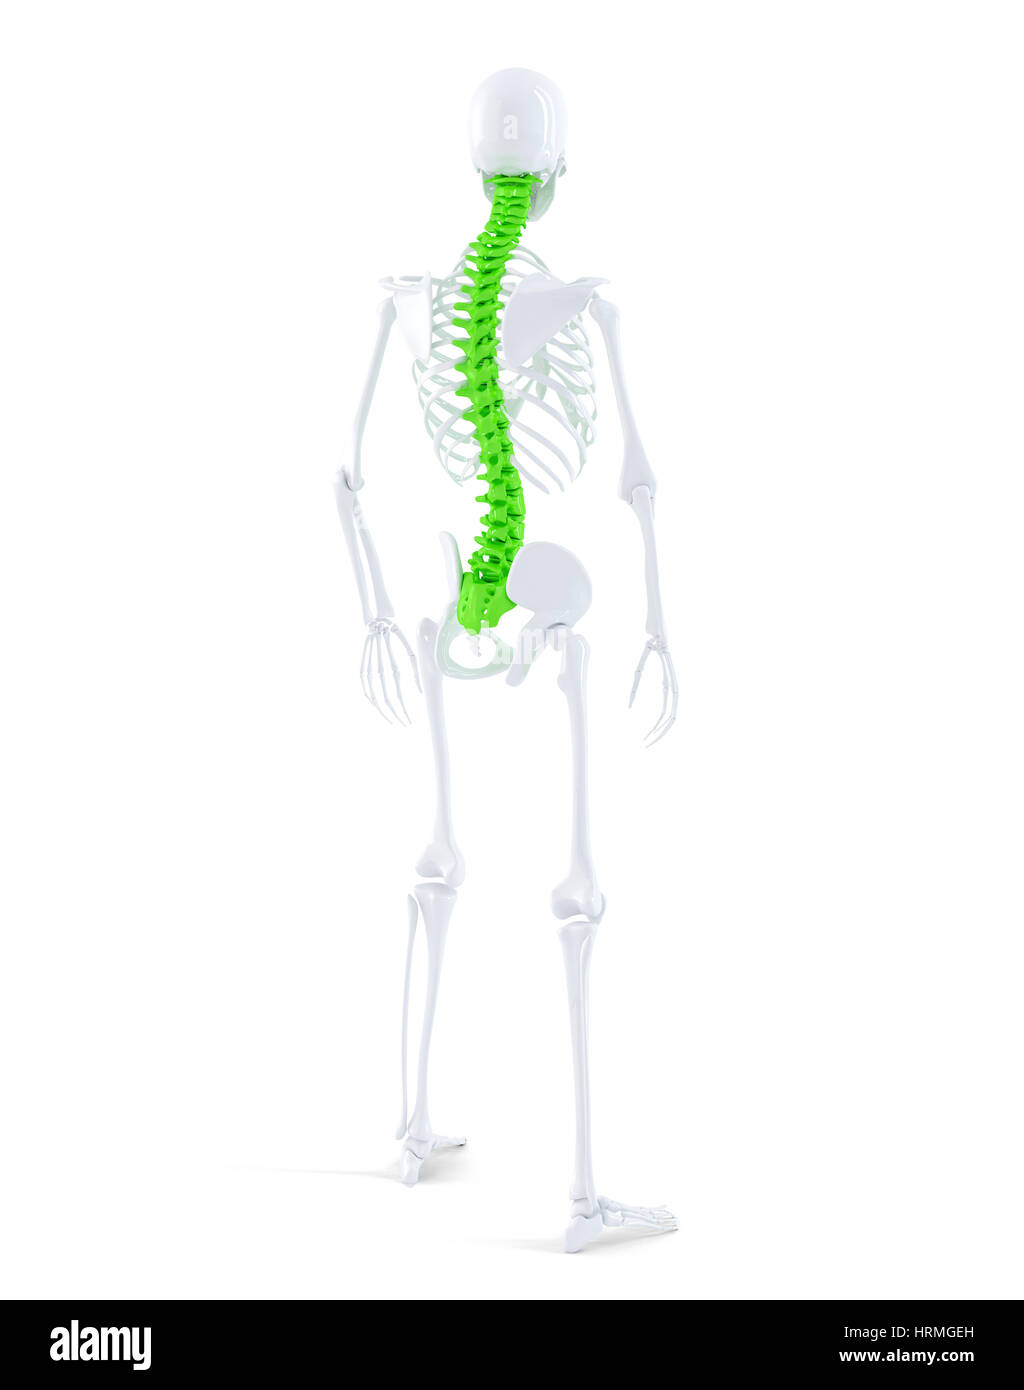 Human skeleton with highlited spine. Isolated. Contains clippin path Stock Photo